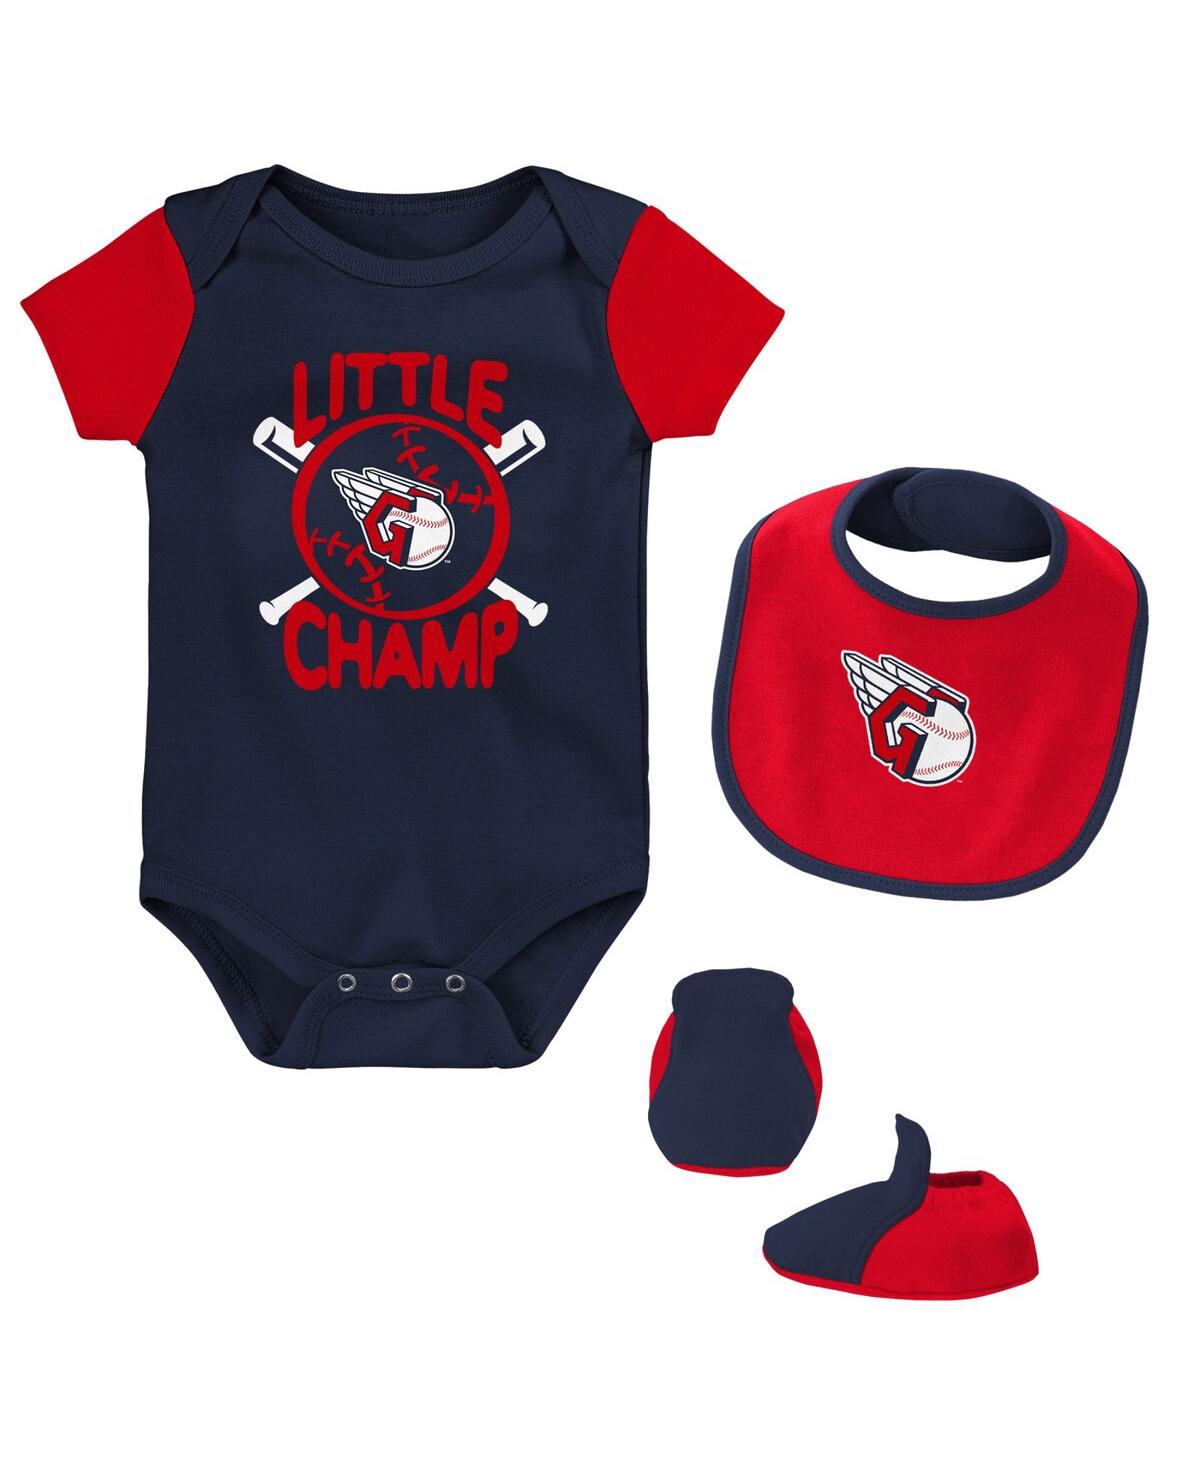 Shop Outerstuff Newborn And Infant Boys And Girls Navy, Red Cleveland Guardians Little Champ Three-pack Bodysuit Bib In Navy,red